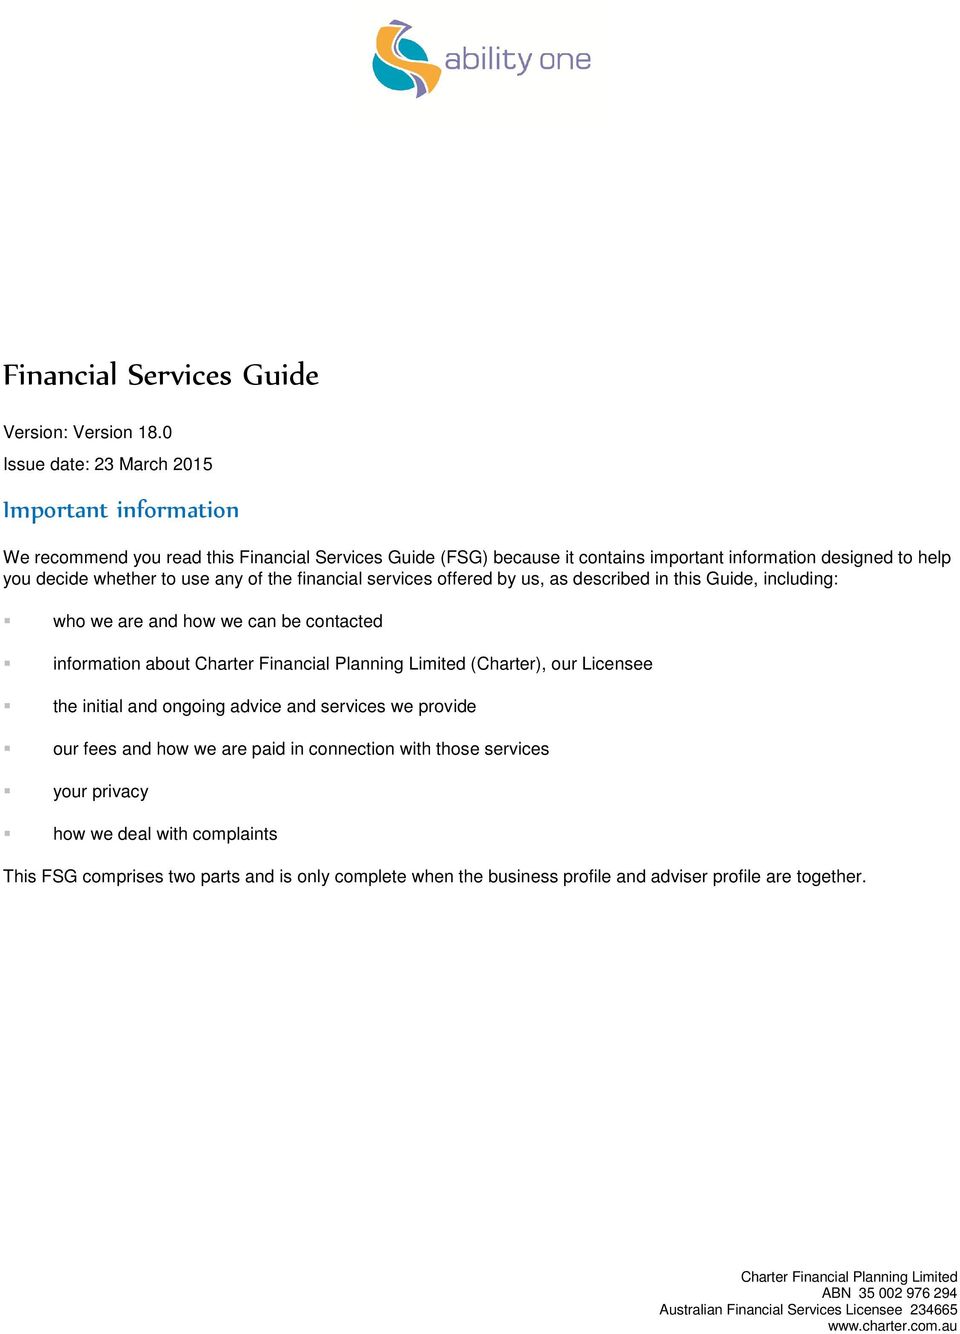 the financial services offered by us, as described in this Guide, including: who we are and how we can be contacted information about Charter Financial Planning Limited (Charter), our Licensee the